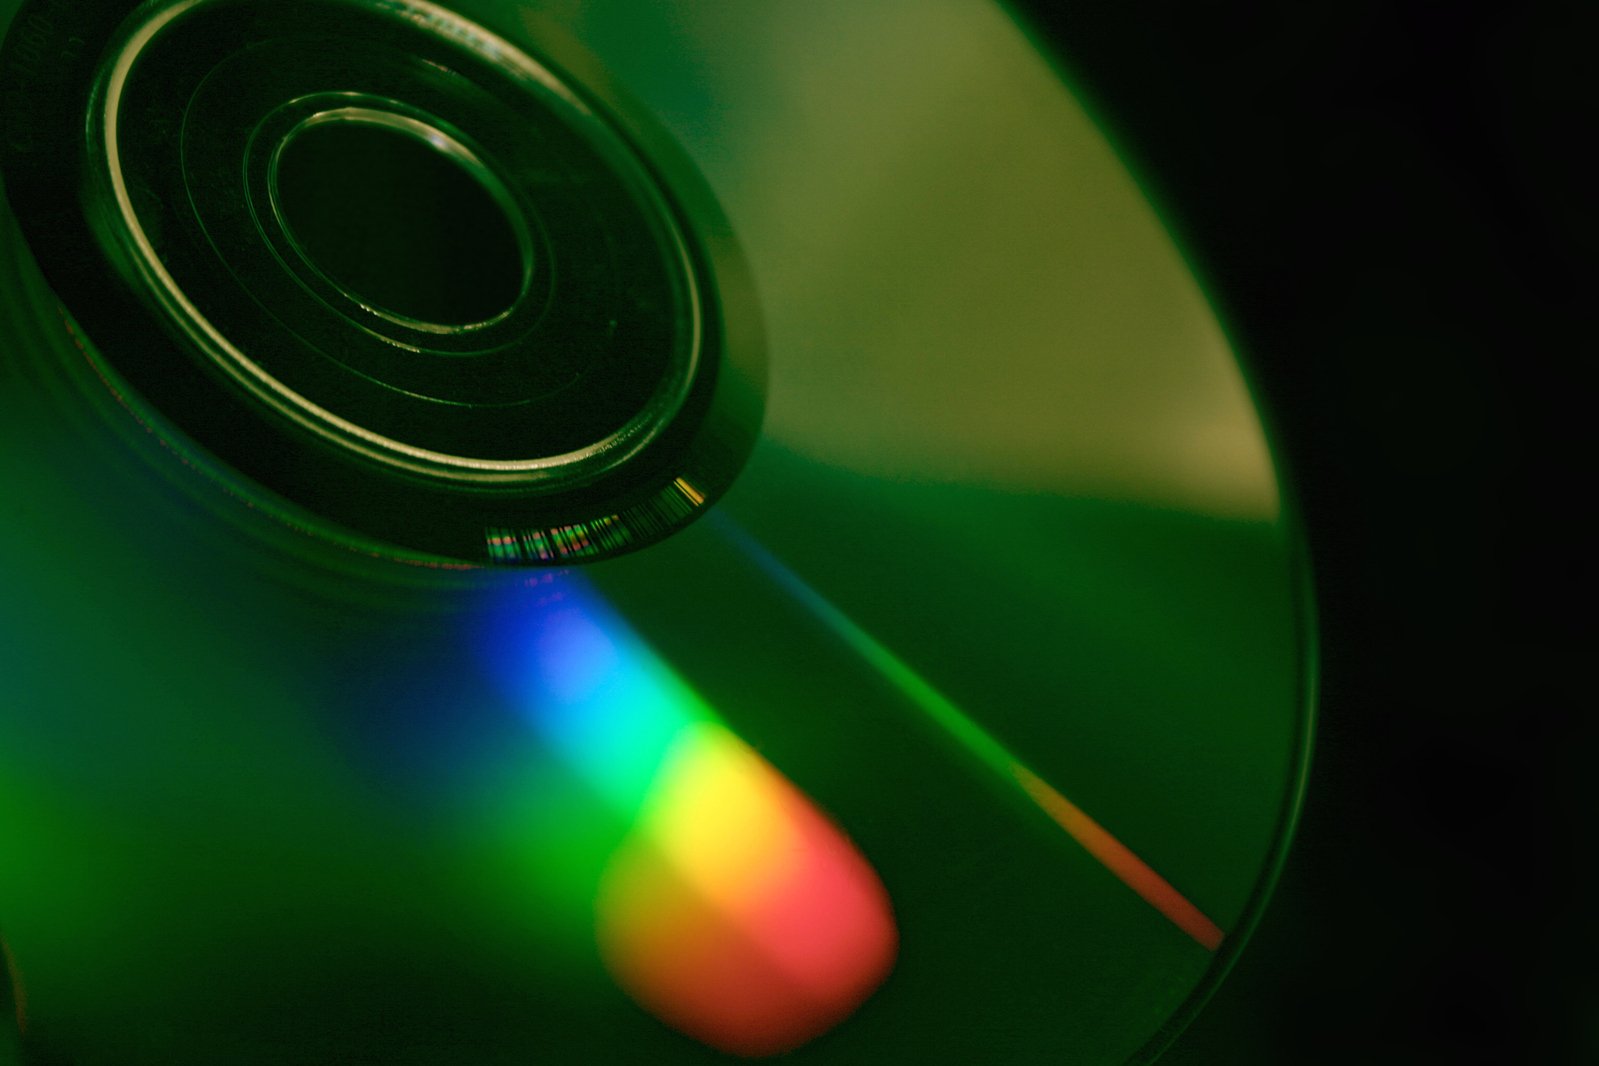 a bright colored disk with a blurry background